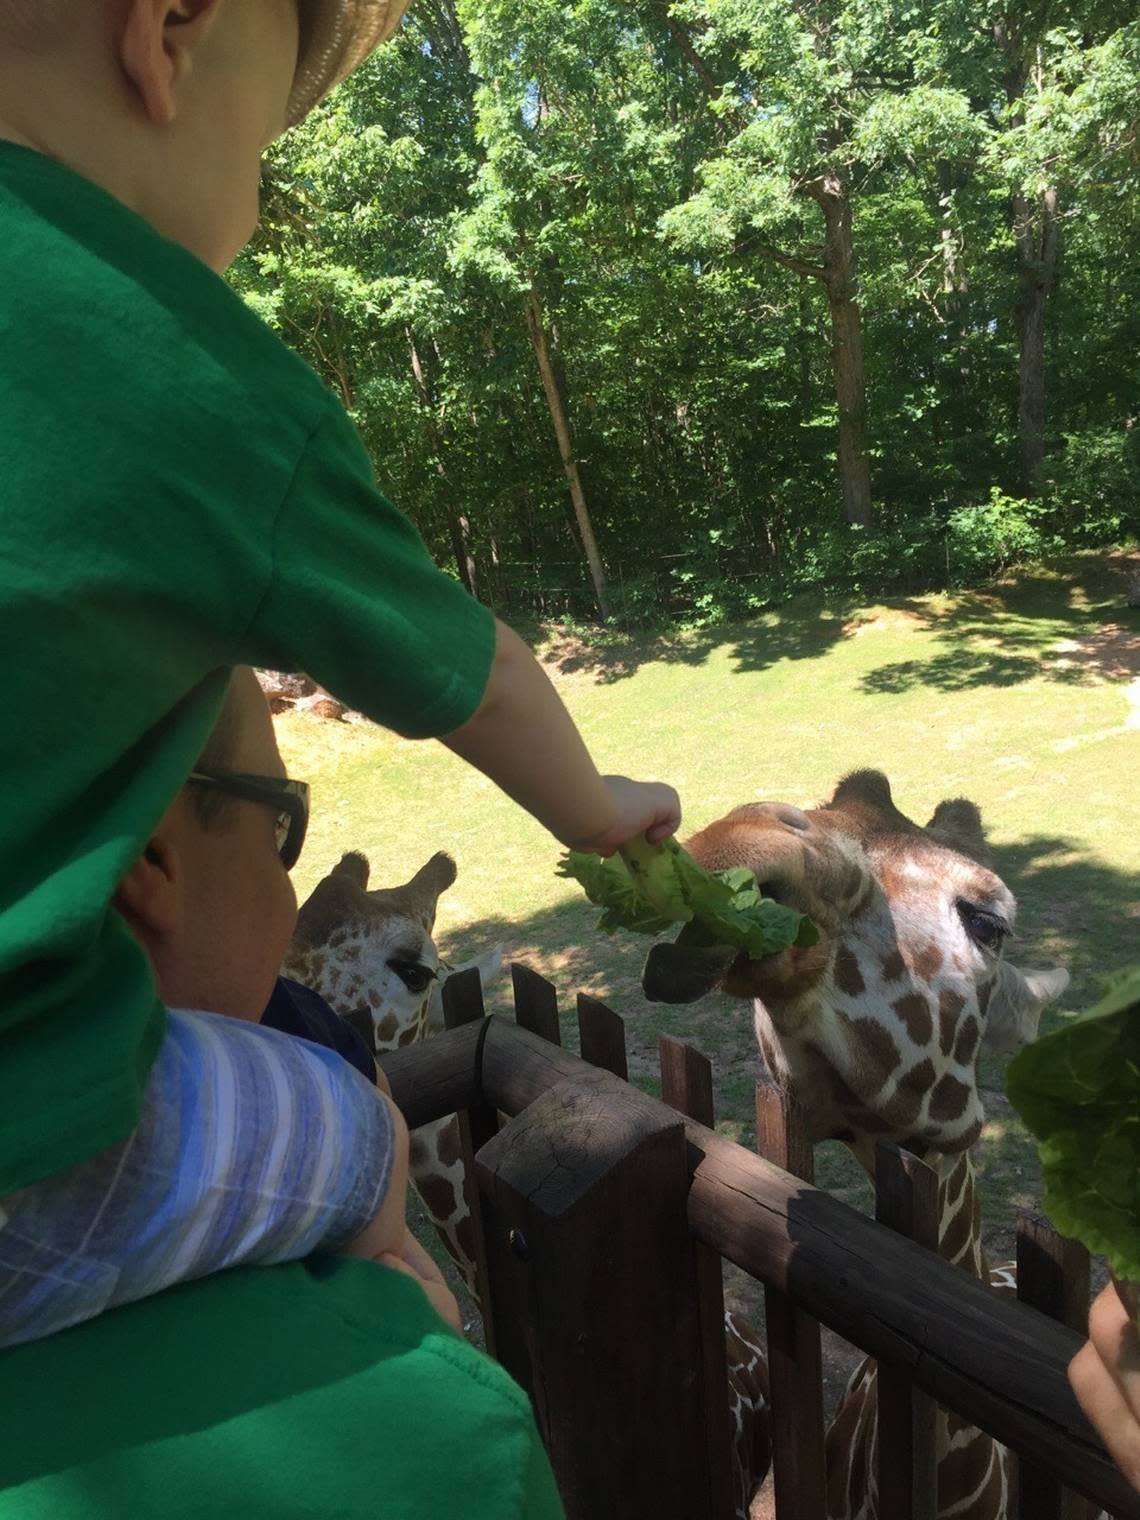 Feeding the giraffes at the NC Zoo in 2017.